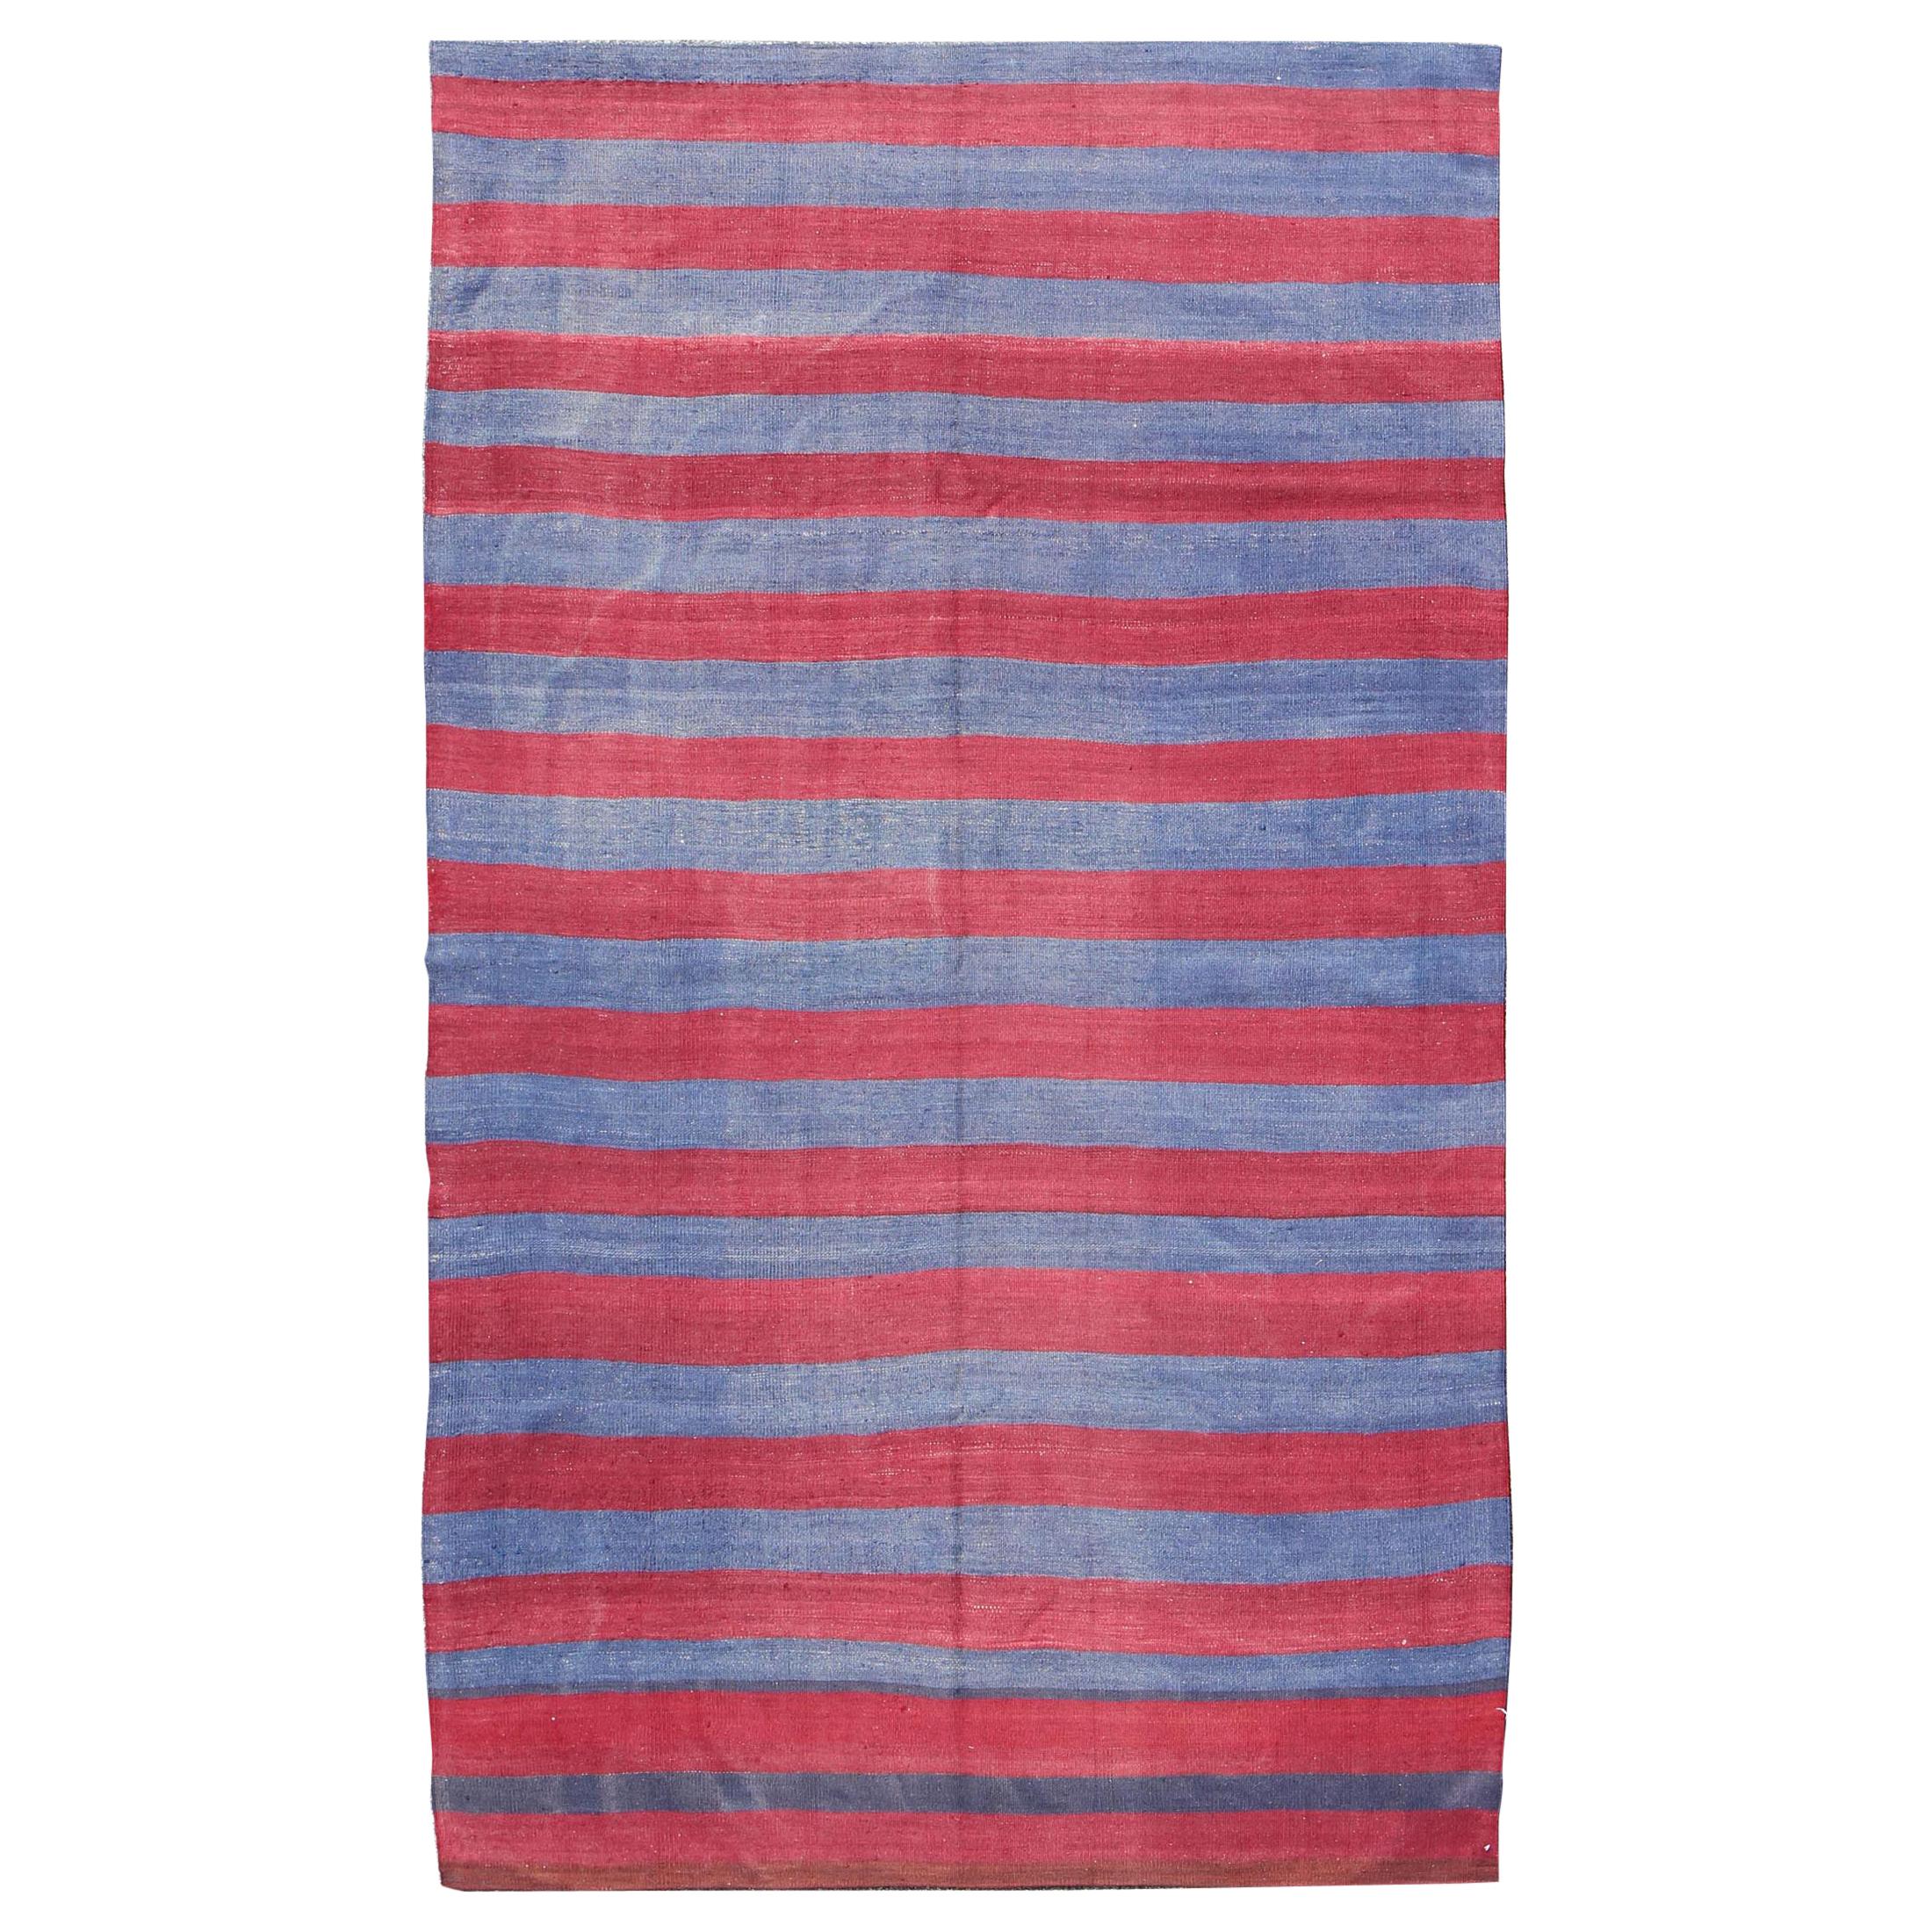 Vintage Striped Turkish Kilim with Casual Modern Design in Red and Blue